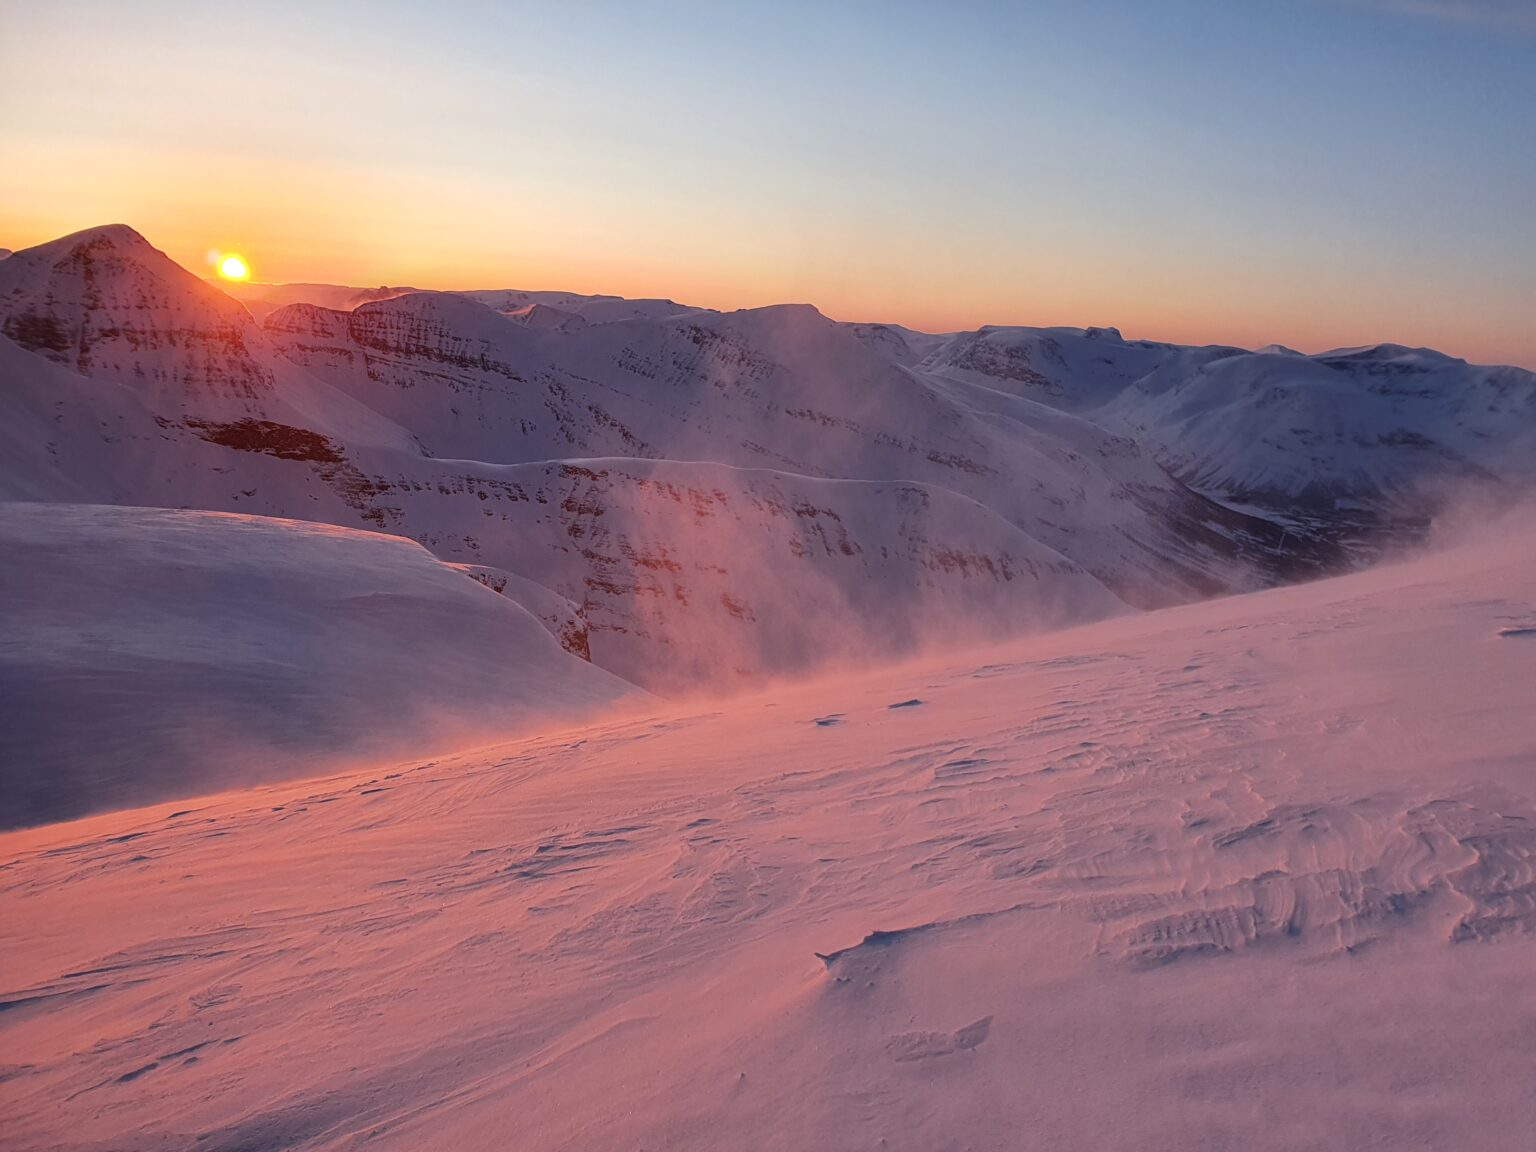 Beautiful sunrise over the Tamokdalen Backcountry in Northern Norway just before snowboarding the South Chute of Háhttagáisi